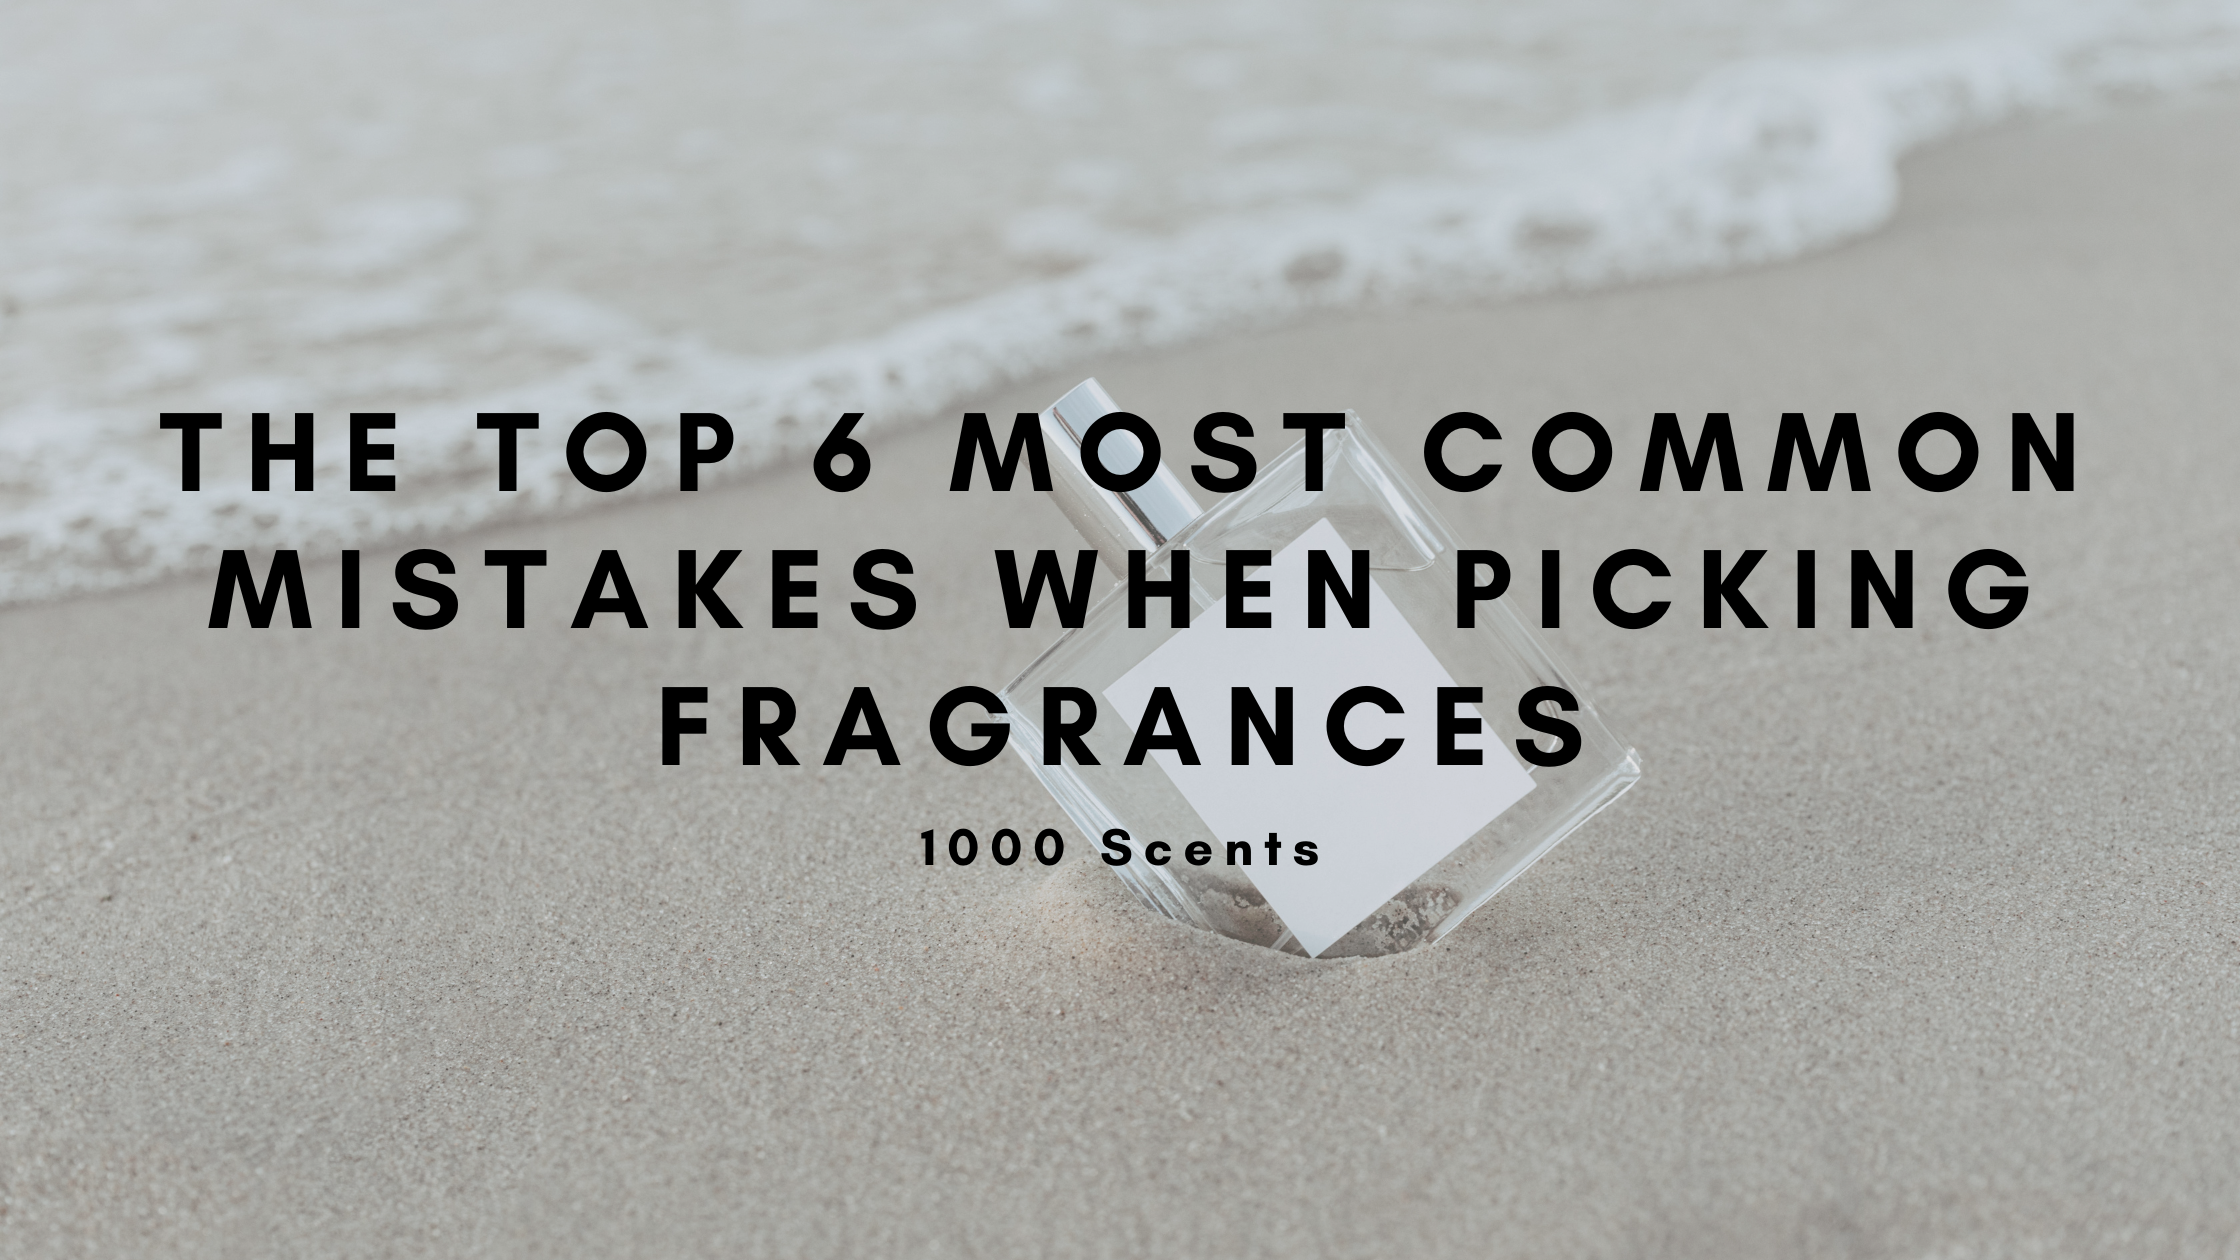 The Top 6 Most Common Mistakes When Picking Fragrances